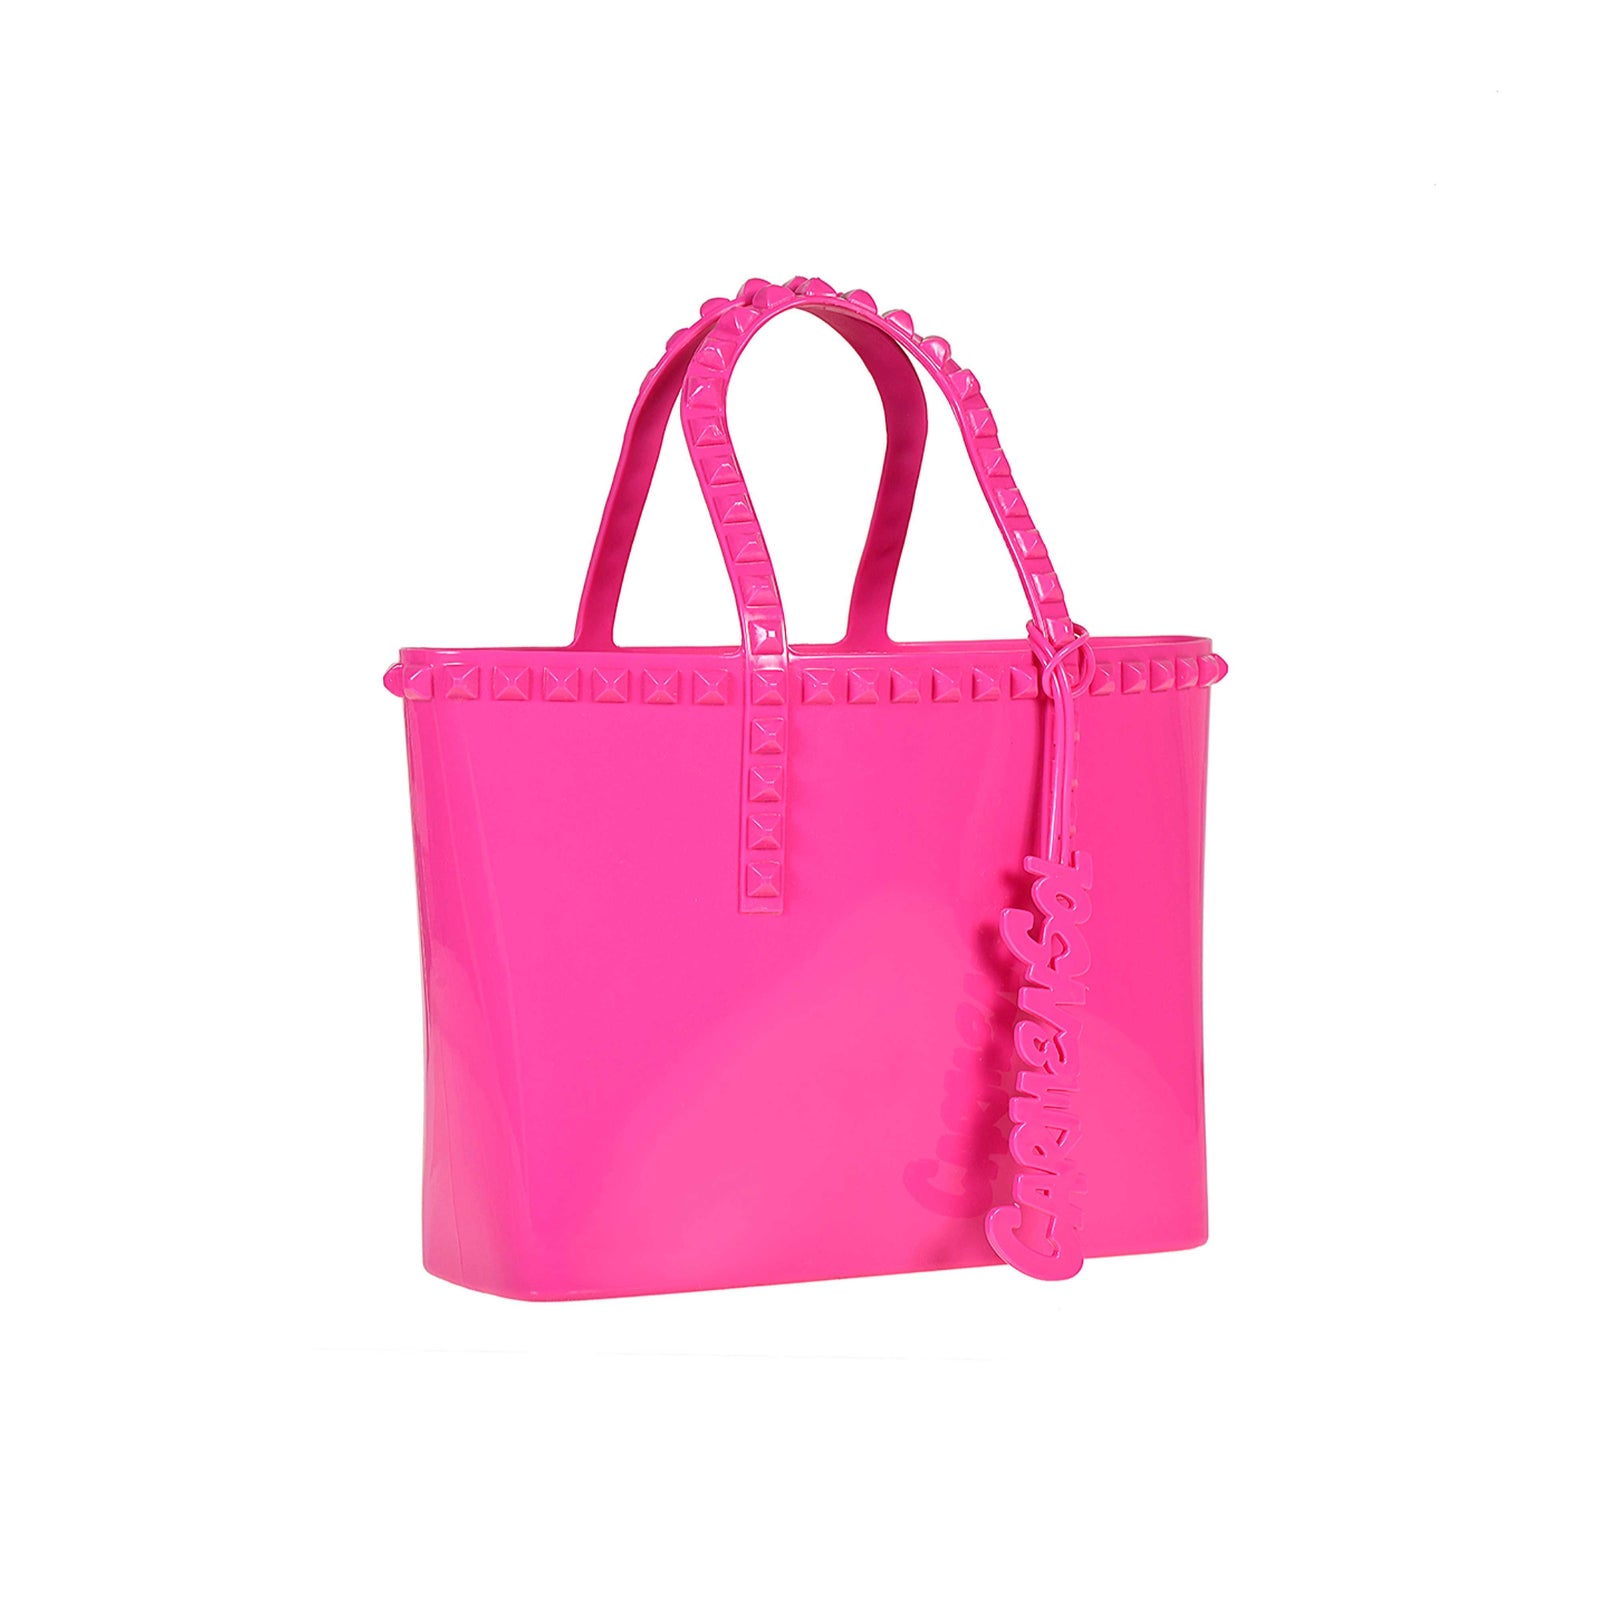 jelly beach totes in color fuchsia from Carmen Sol